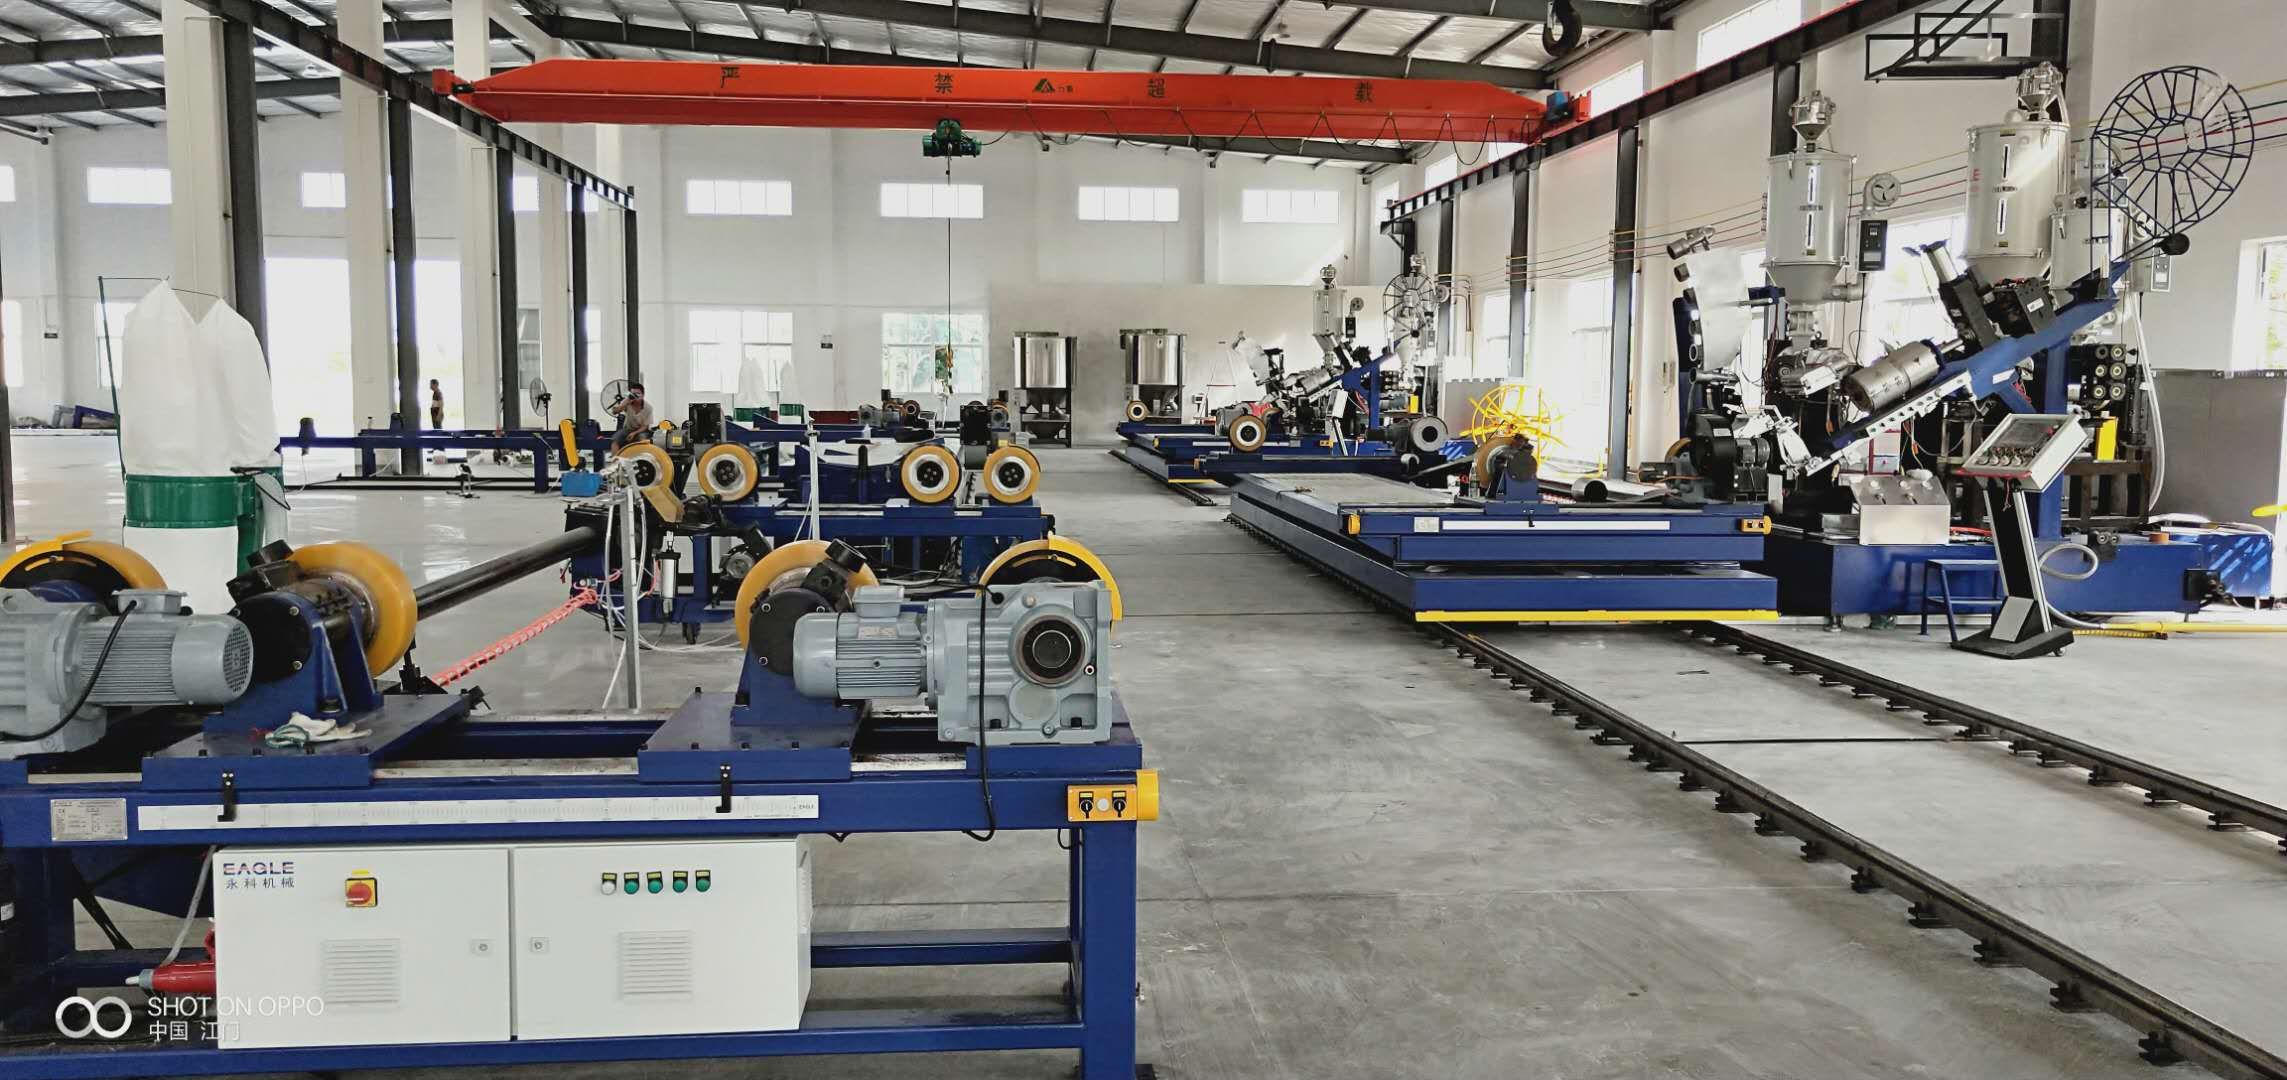 HDPE Spiral Pipe Production machine for Drainage Pipe